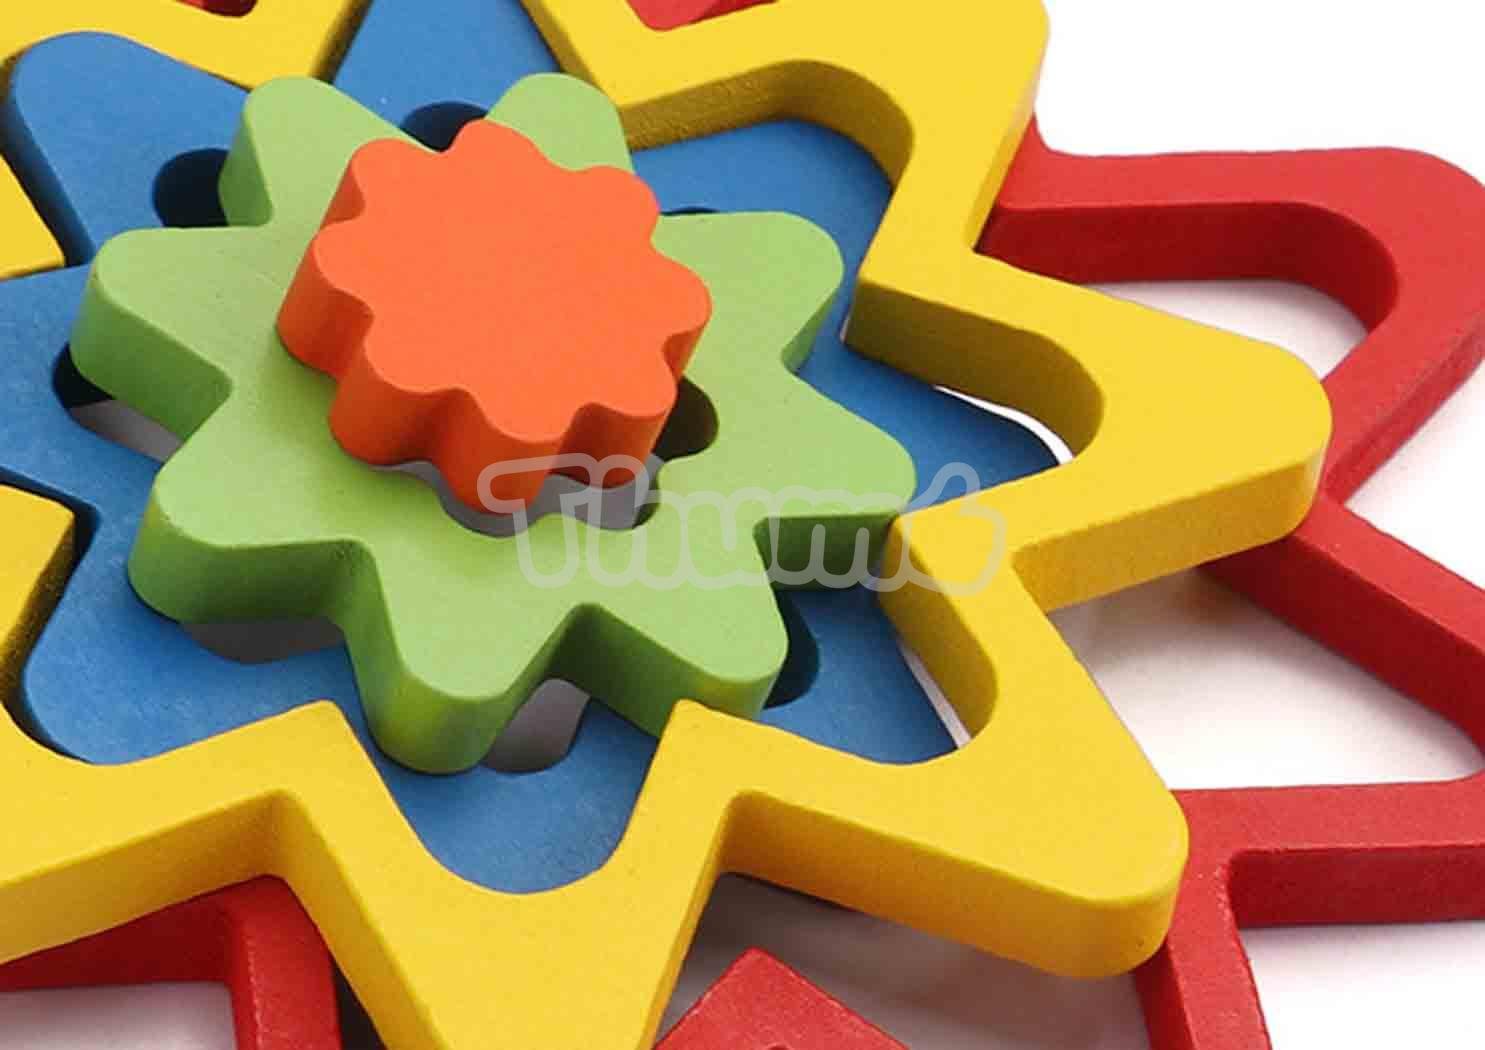 anise star color puzzle2